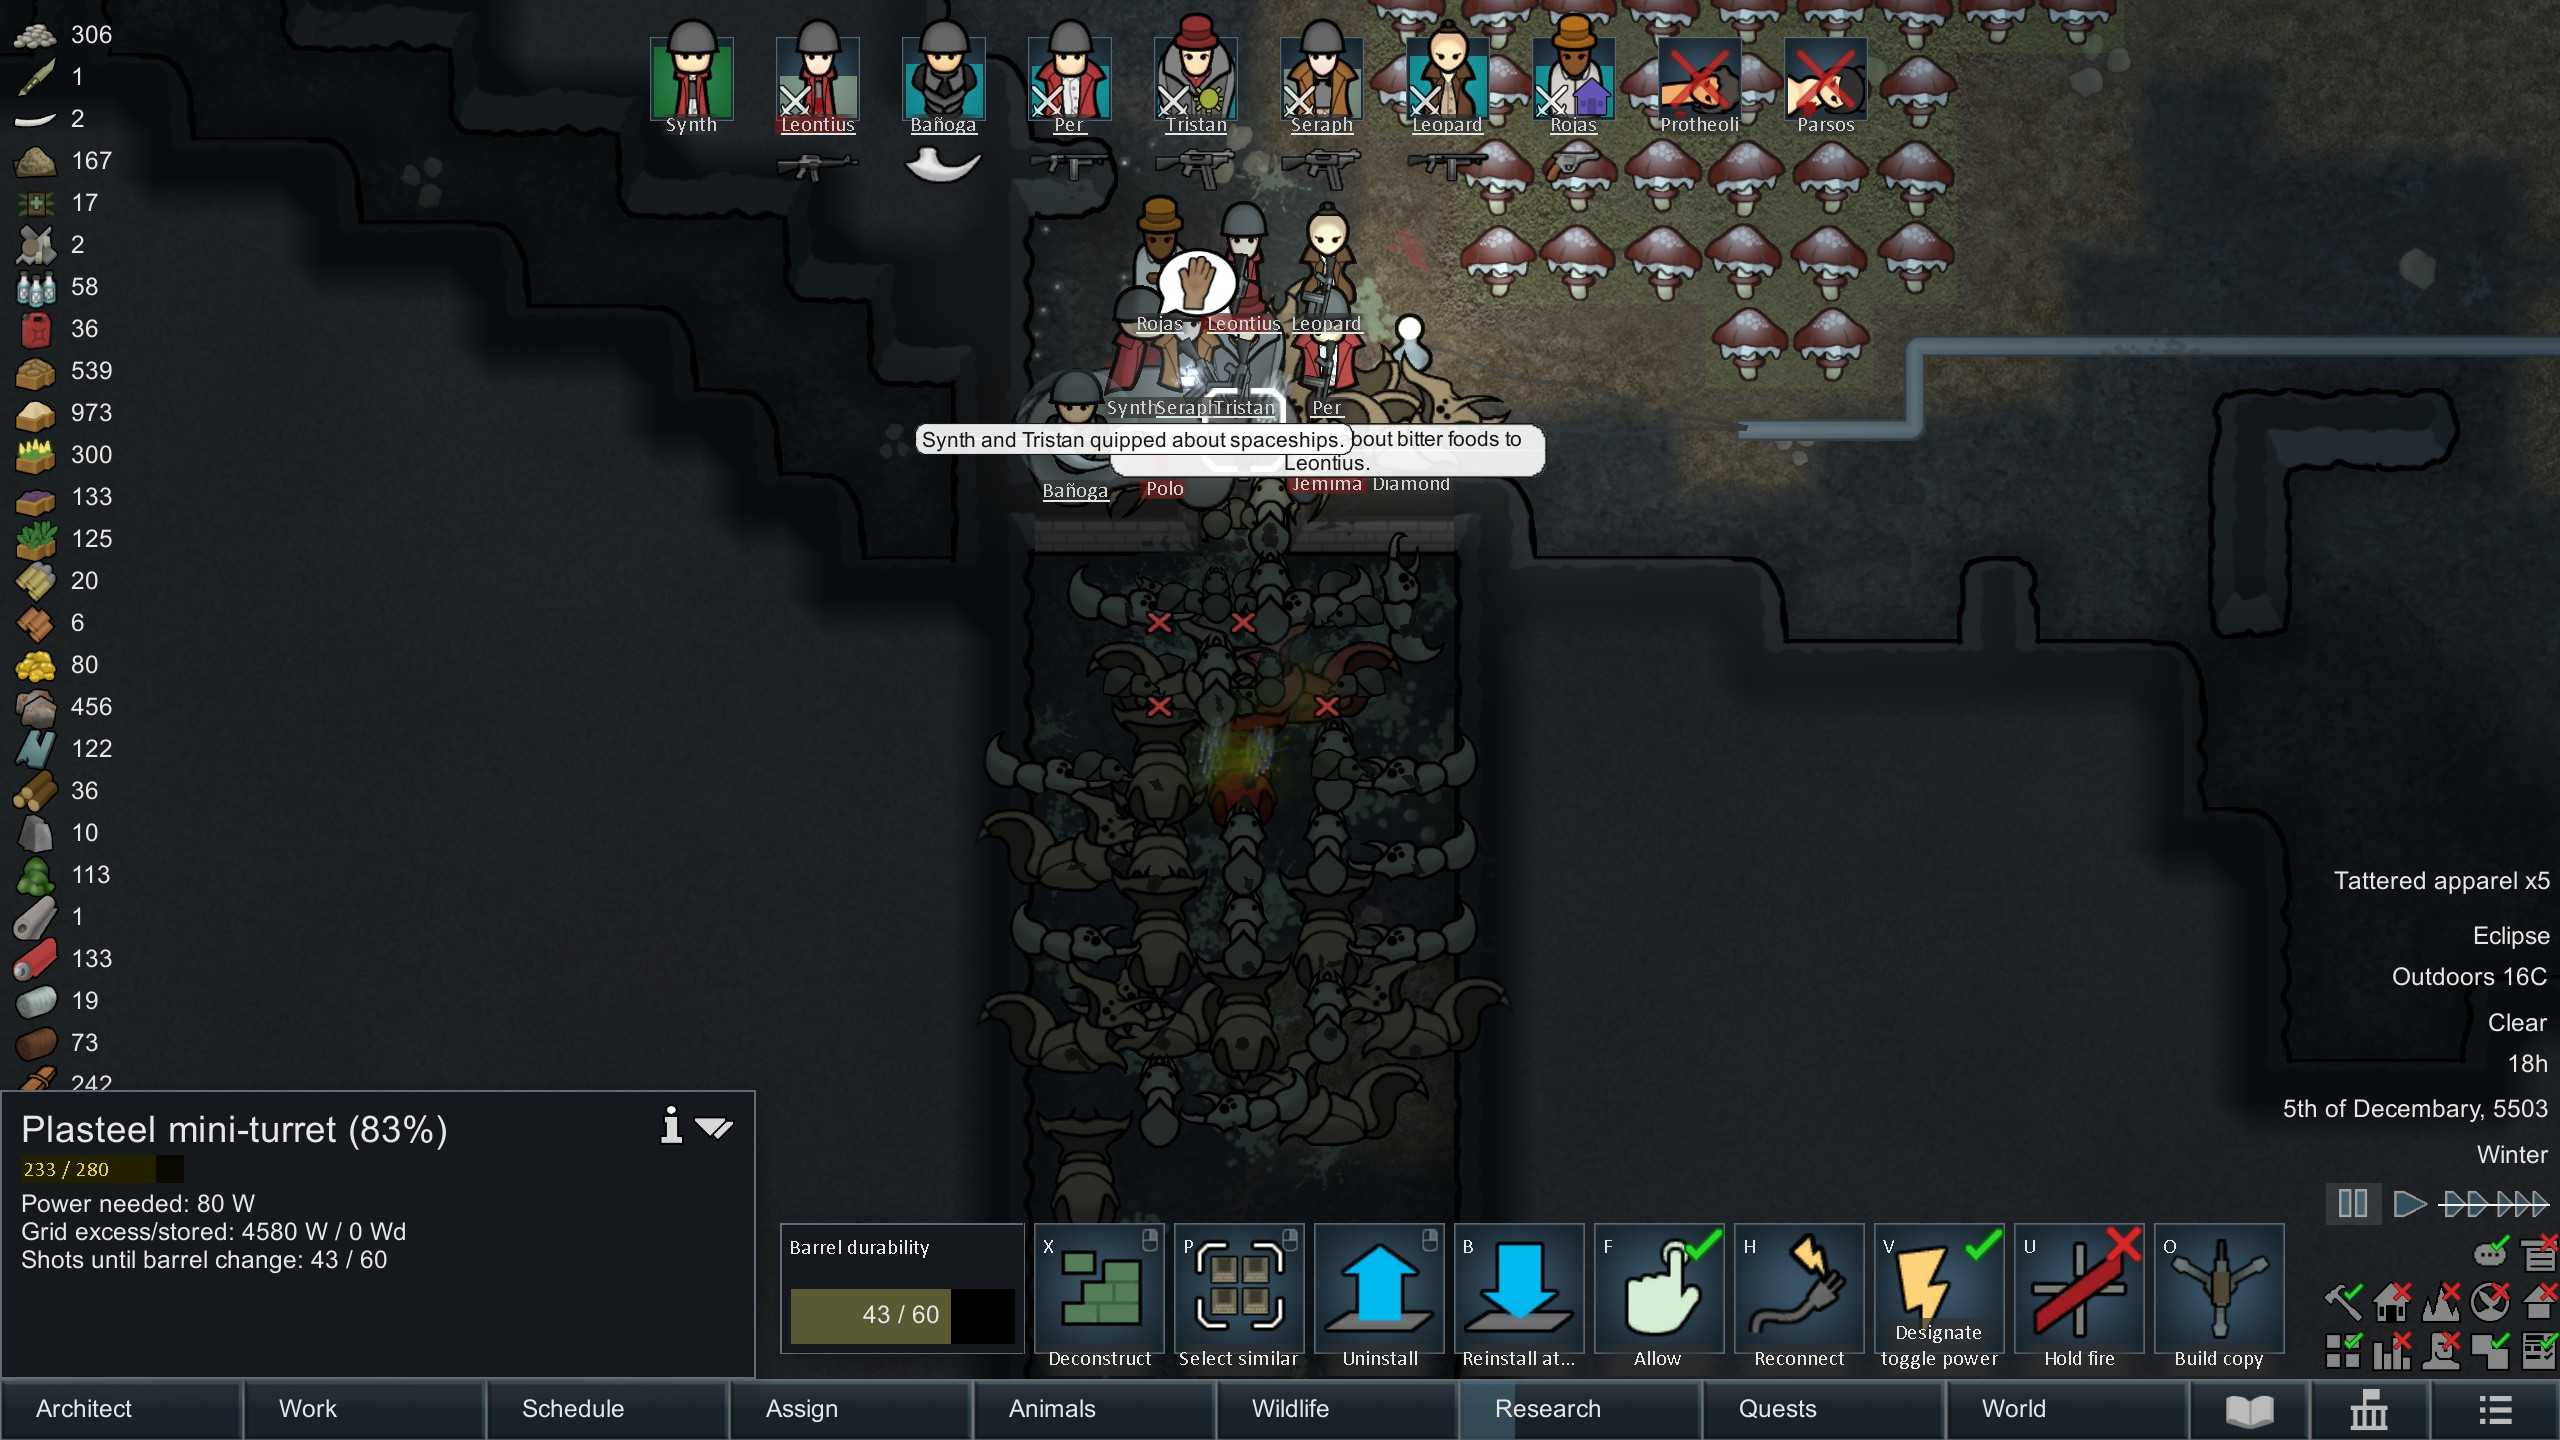 What are the differences between rimworld and going medieval?